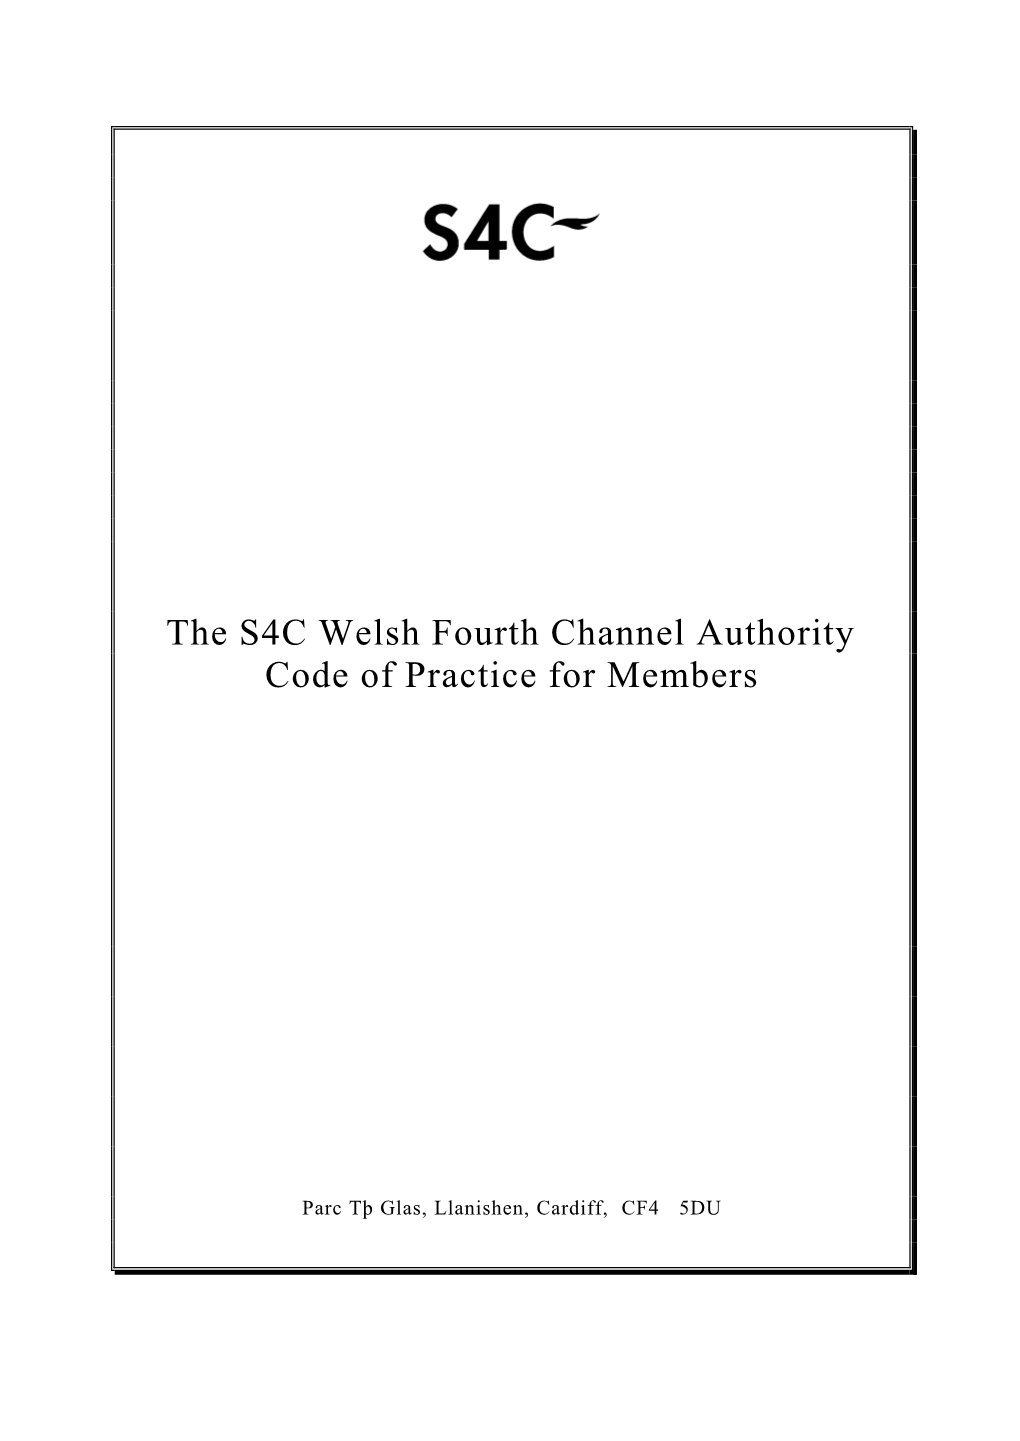 The S4C Welsh Fourth Channel Authority Code of Practice for Members